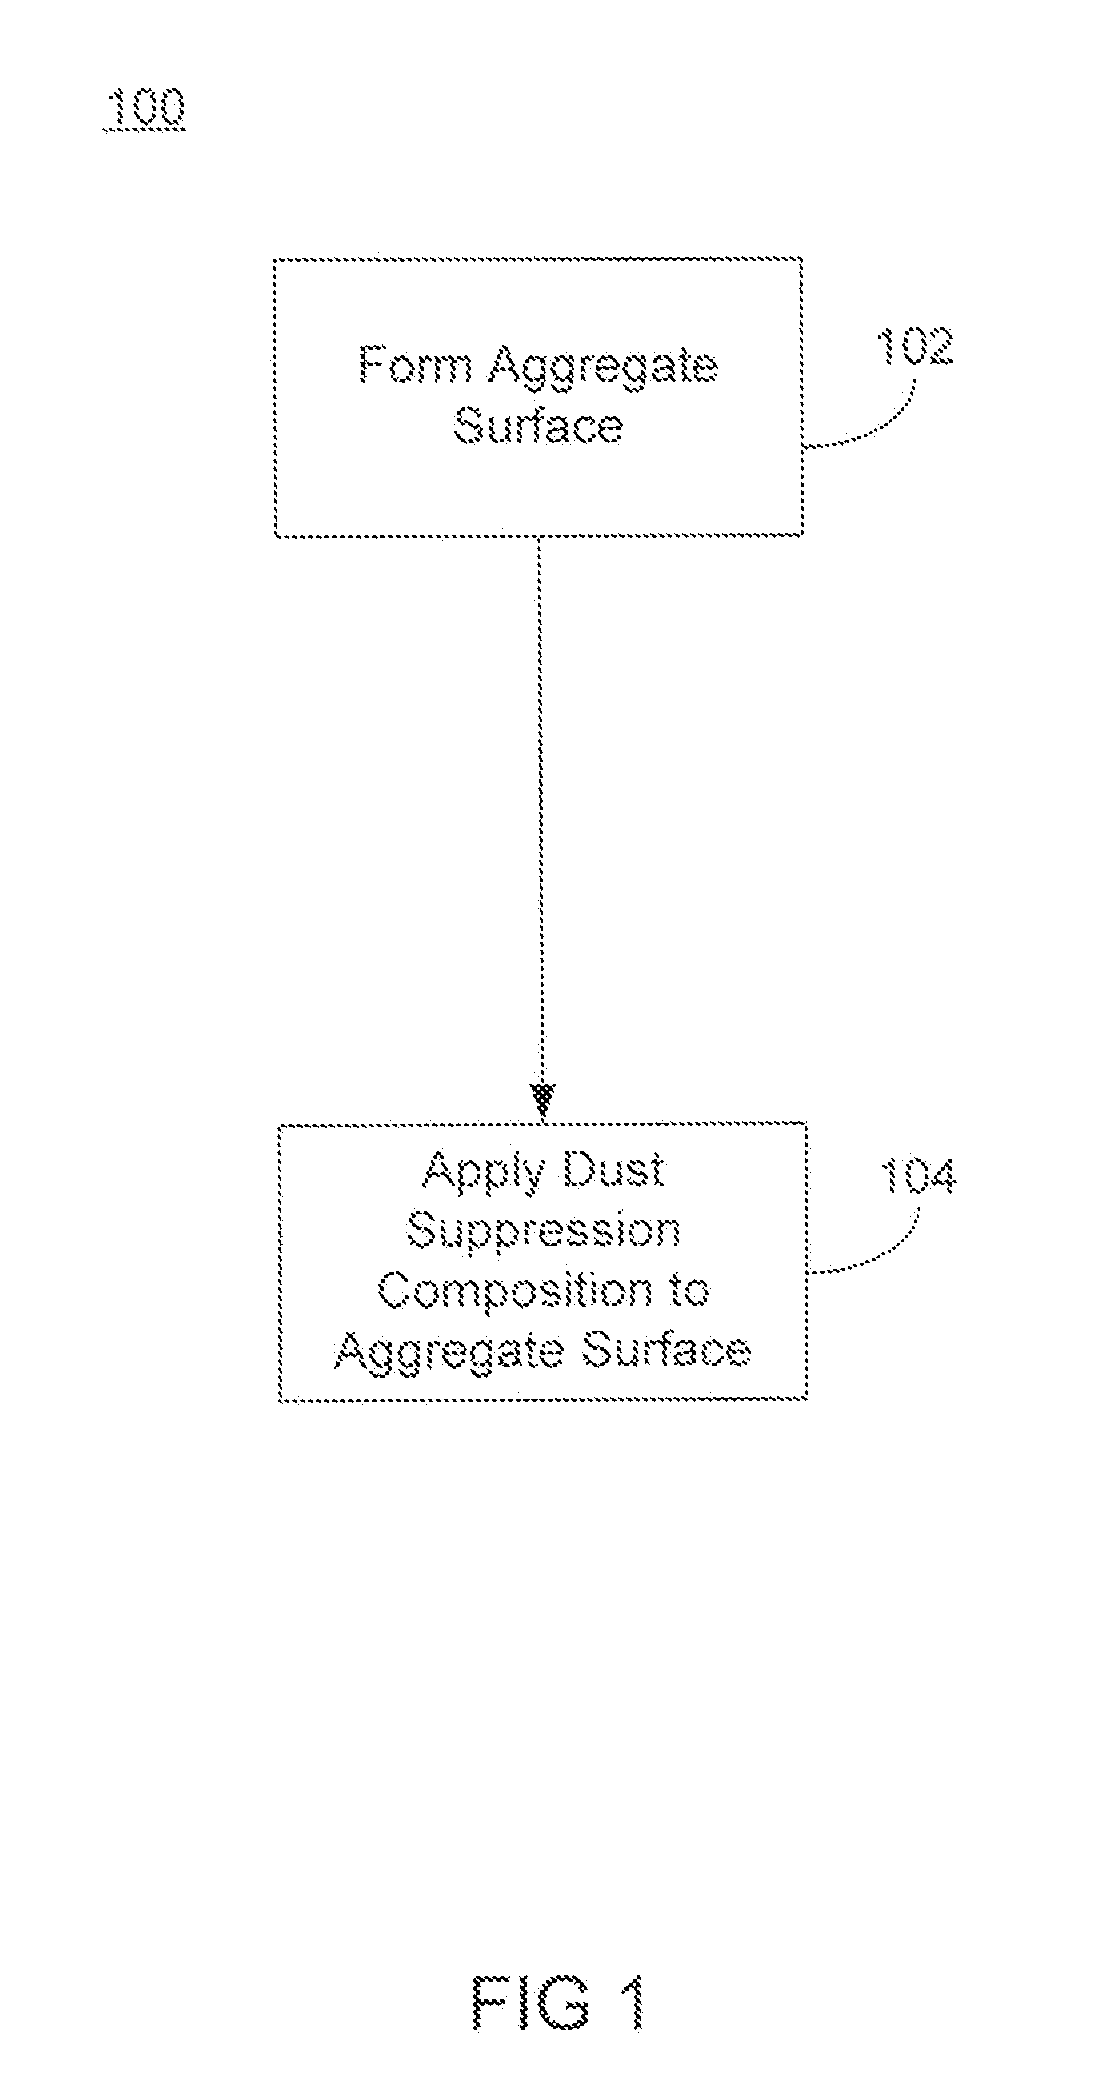 Alkylcellulose and salt compositions for dust control applications